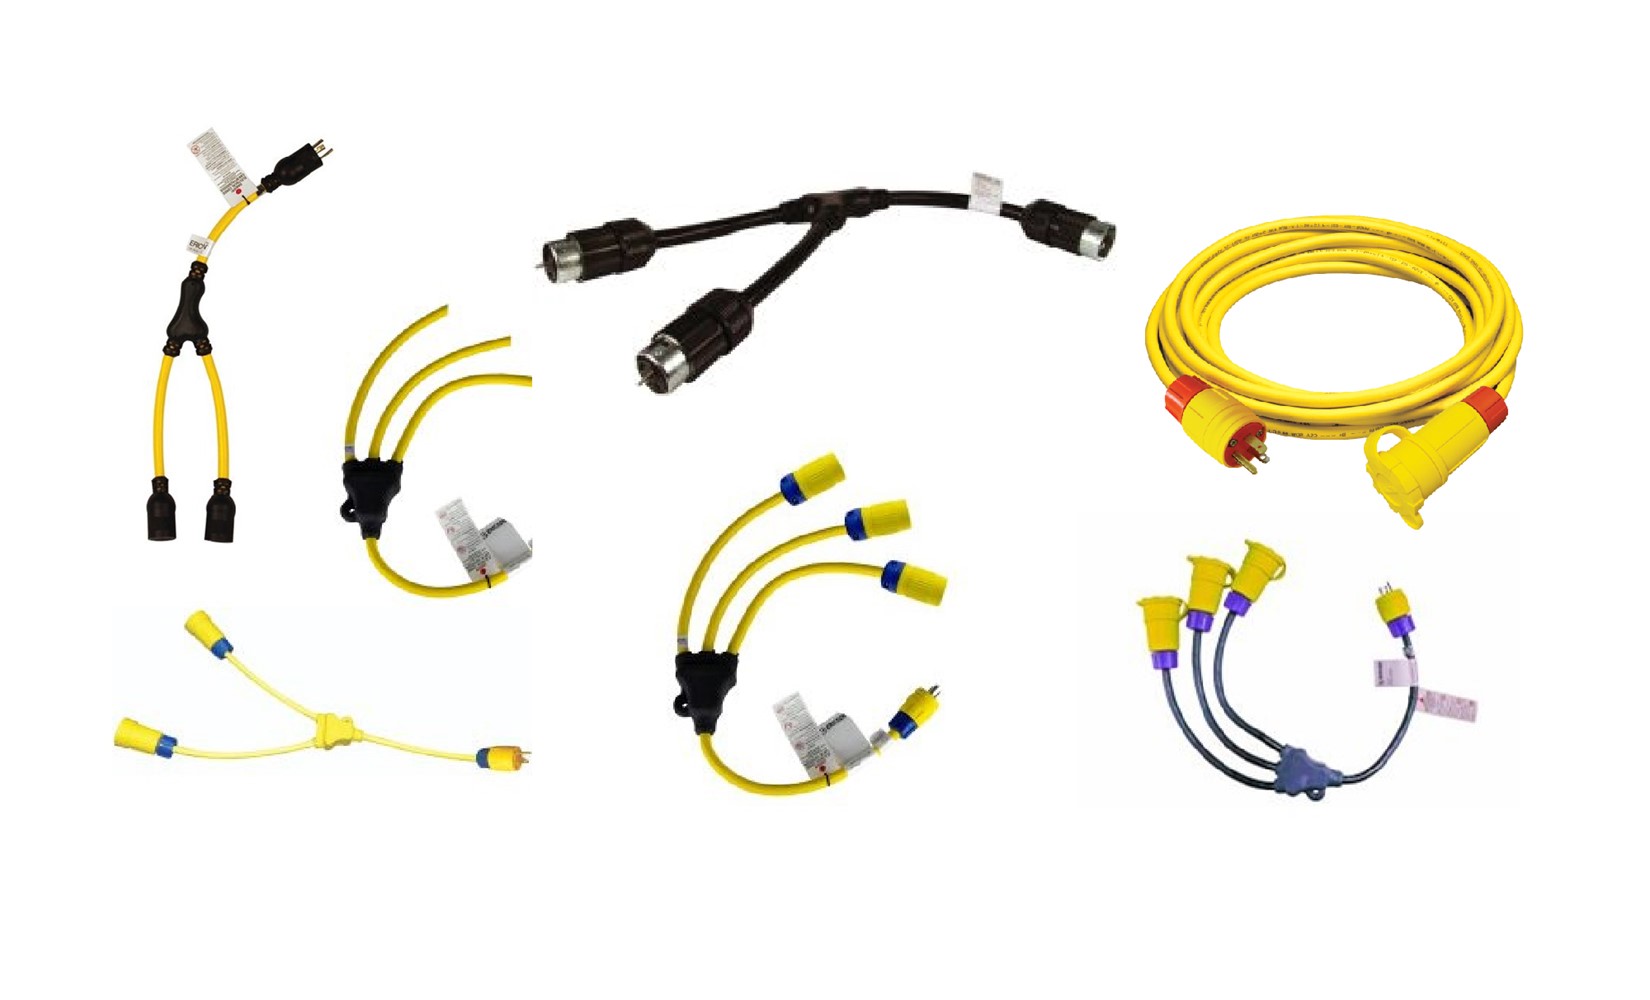 Y/W Splitters & Power Supply Cables